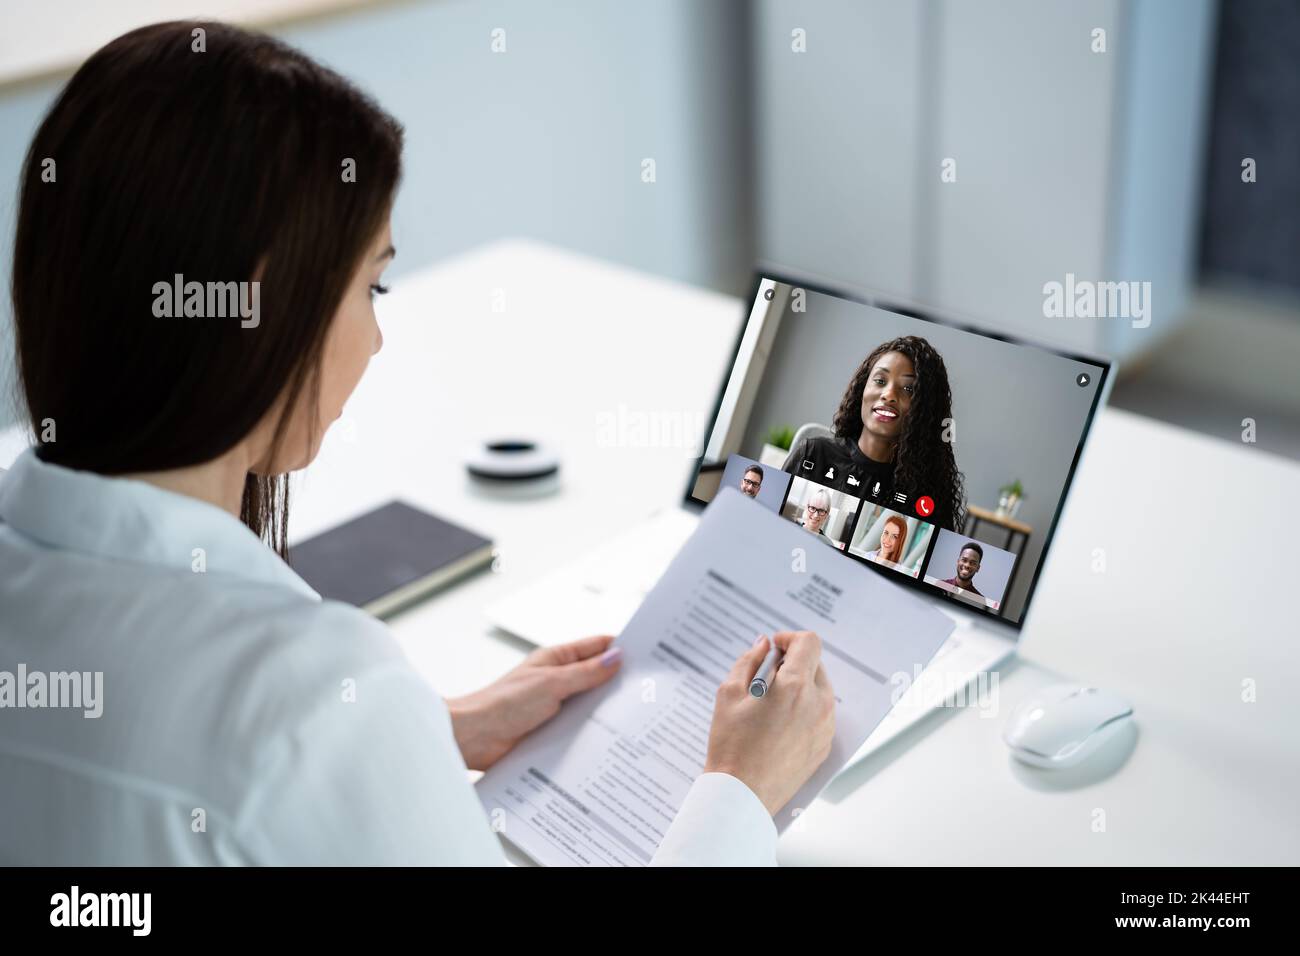 Virtual Job Interview Webcast Using Online Video Conference Stock Photo